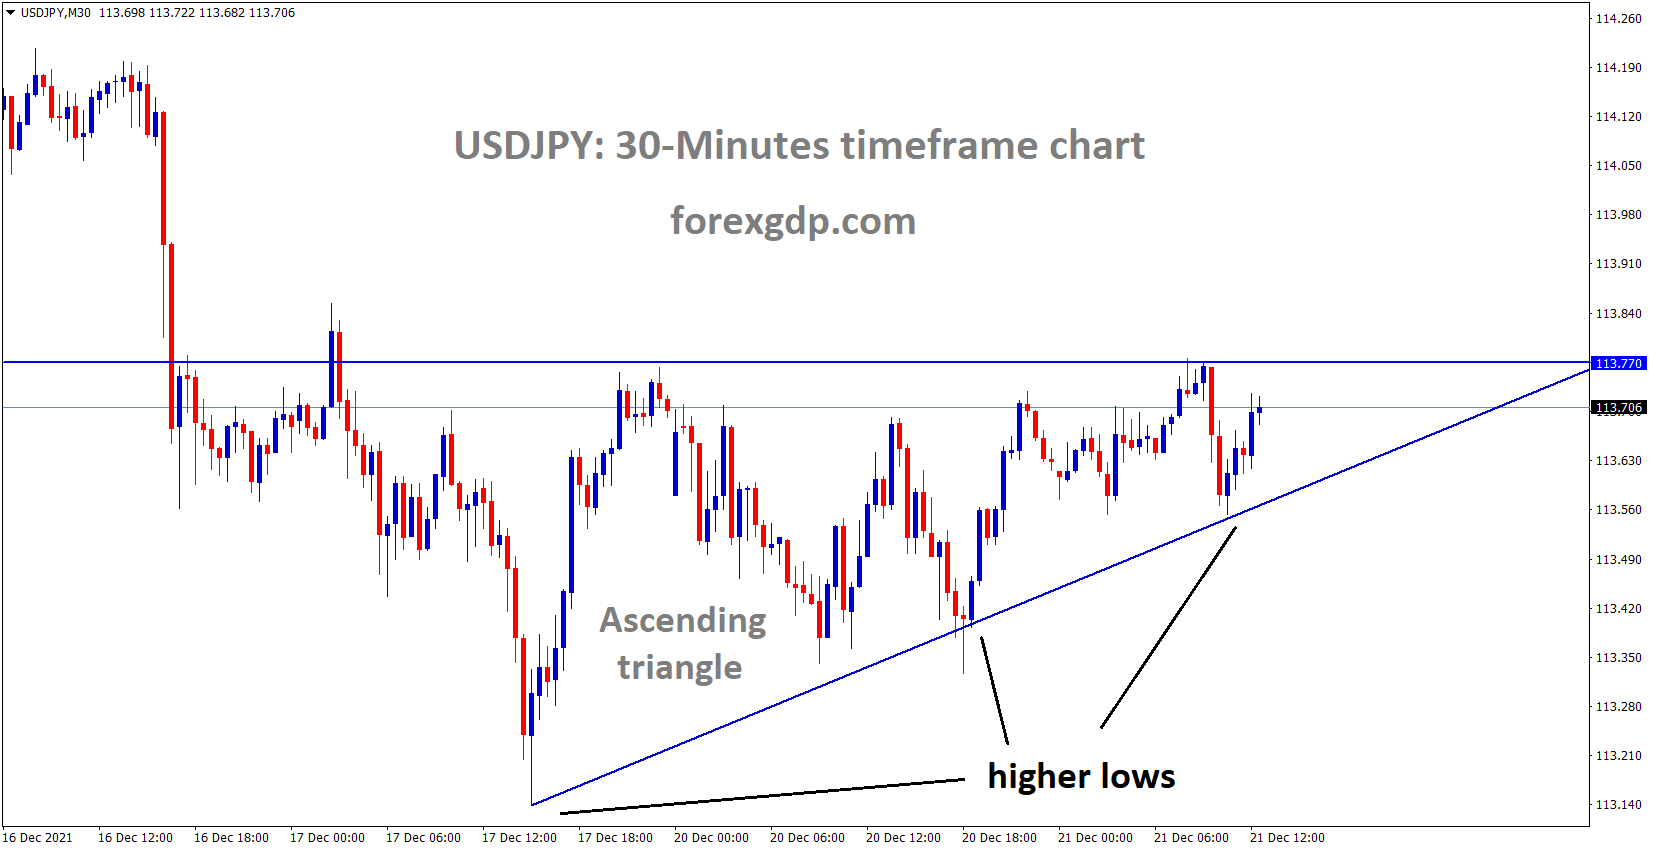 USDJPY is moving in an Ascending triangle pattern and the market has rebounded from the higher low area.